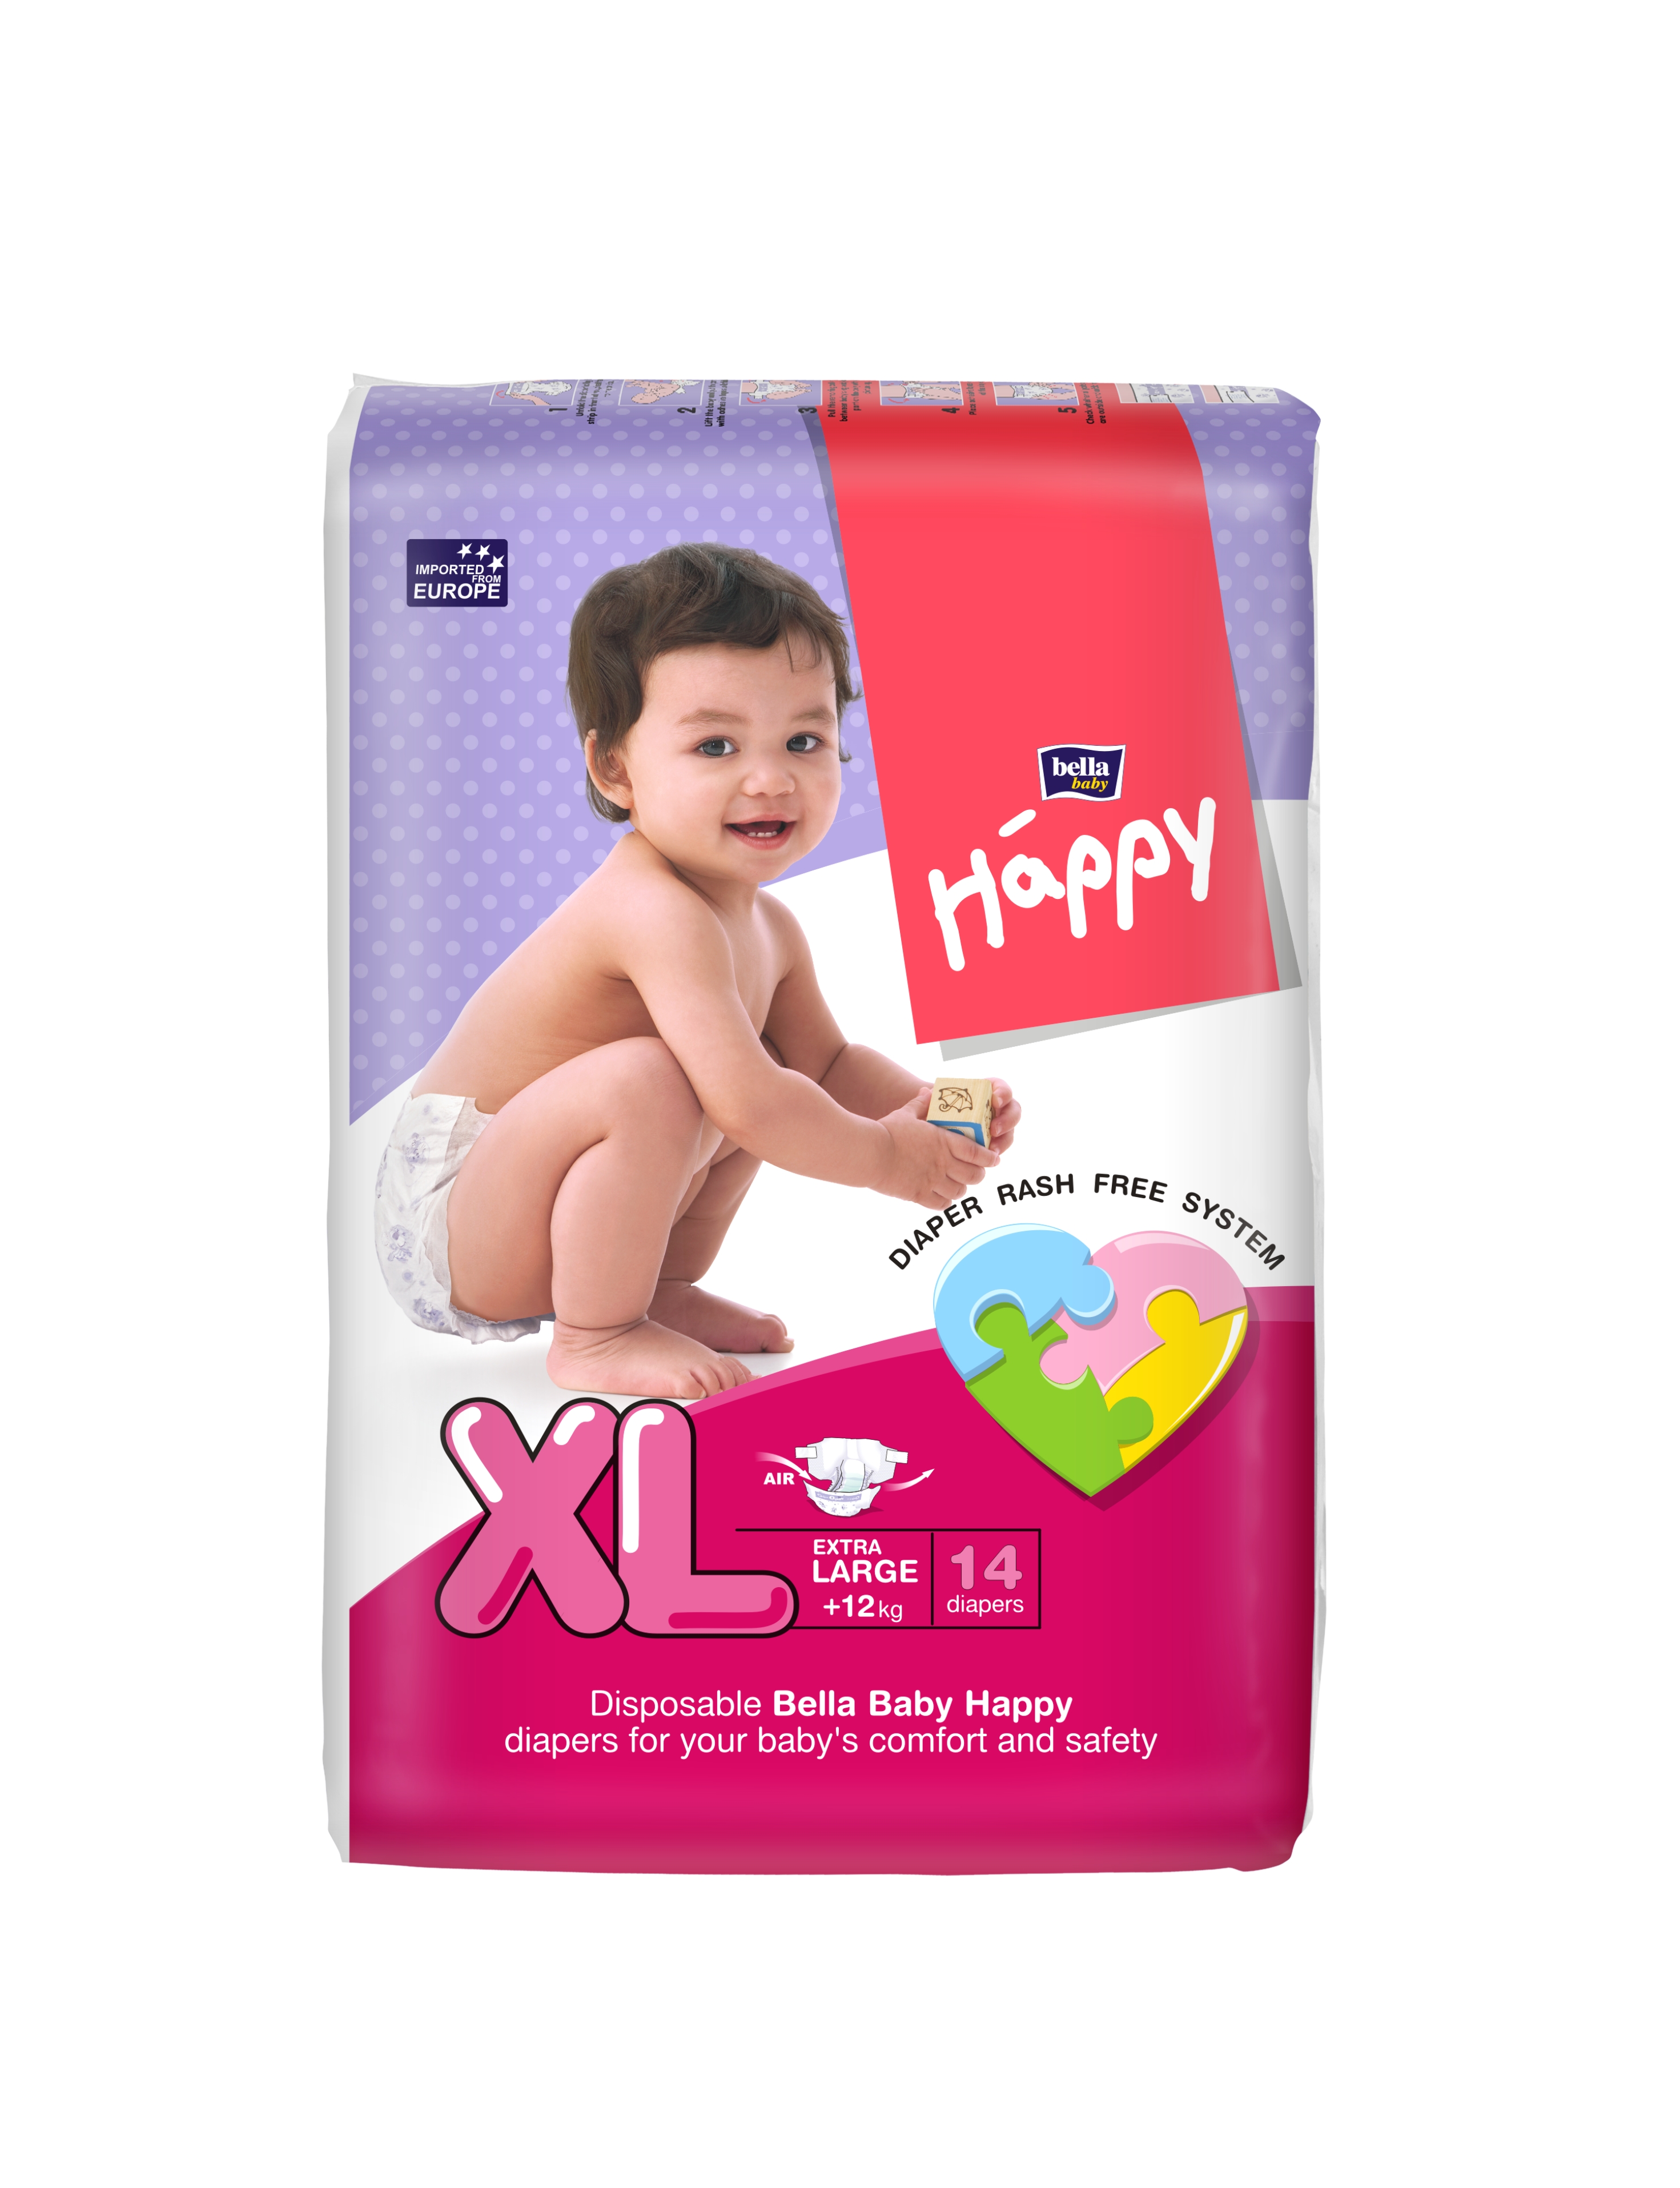 BELLA BABY HAPPY DIAPERS EXTRA LARGE 14 PCS